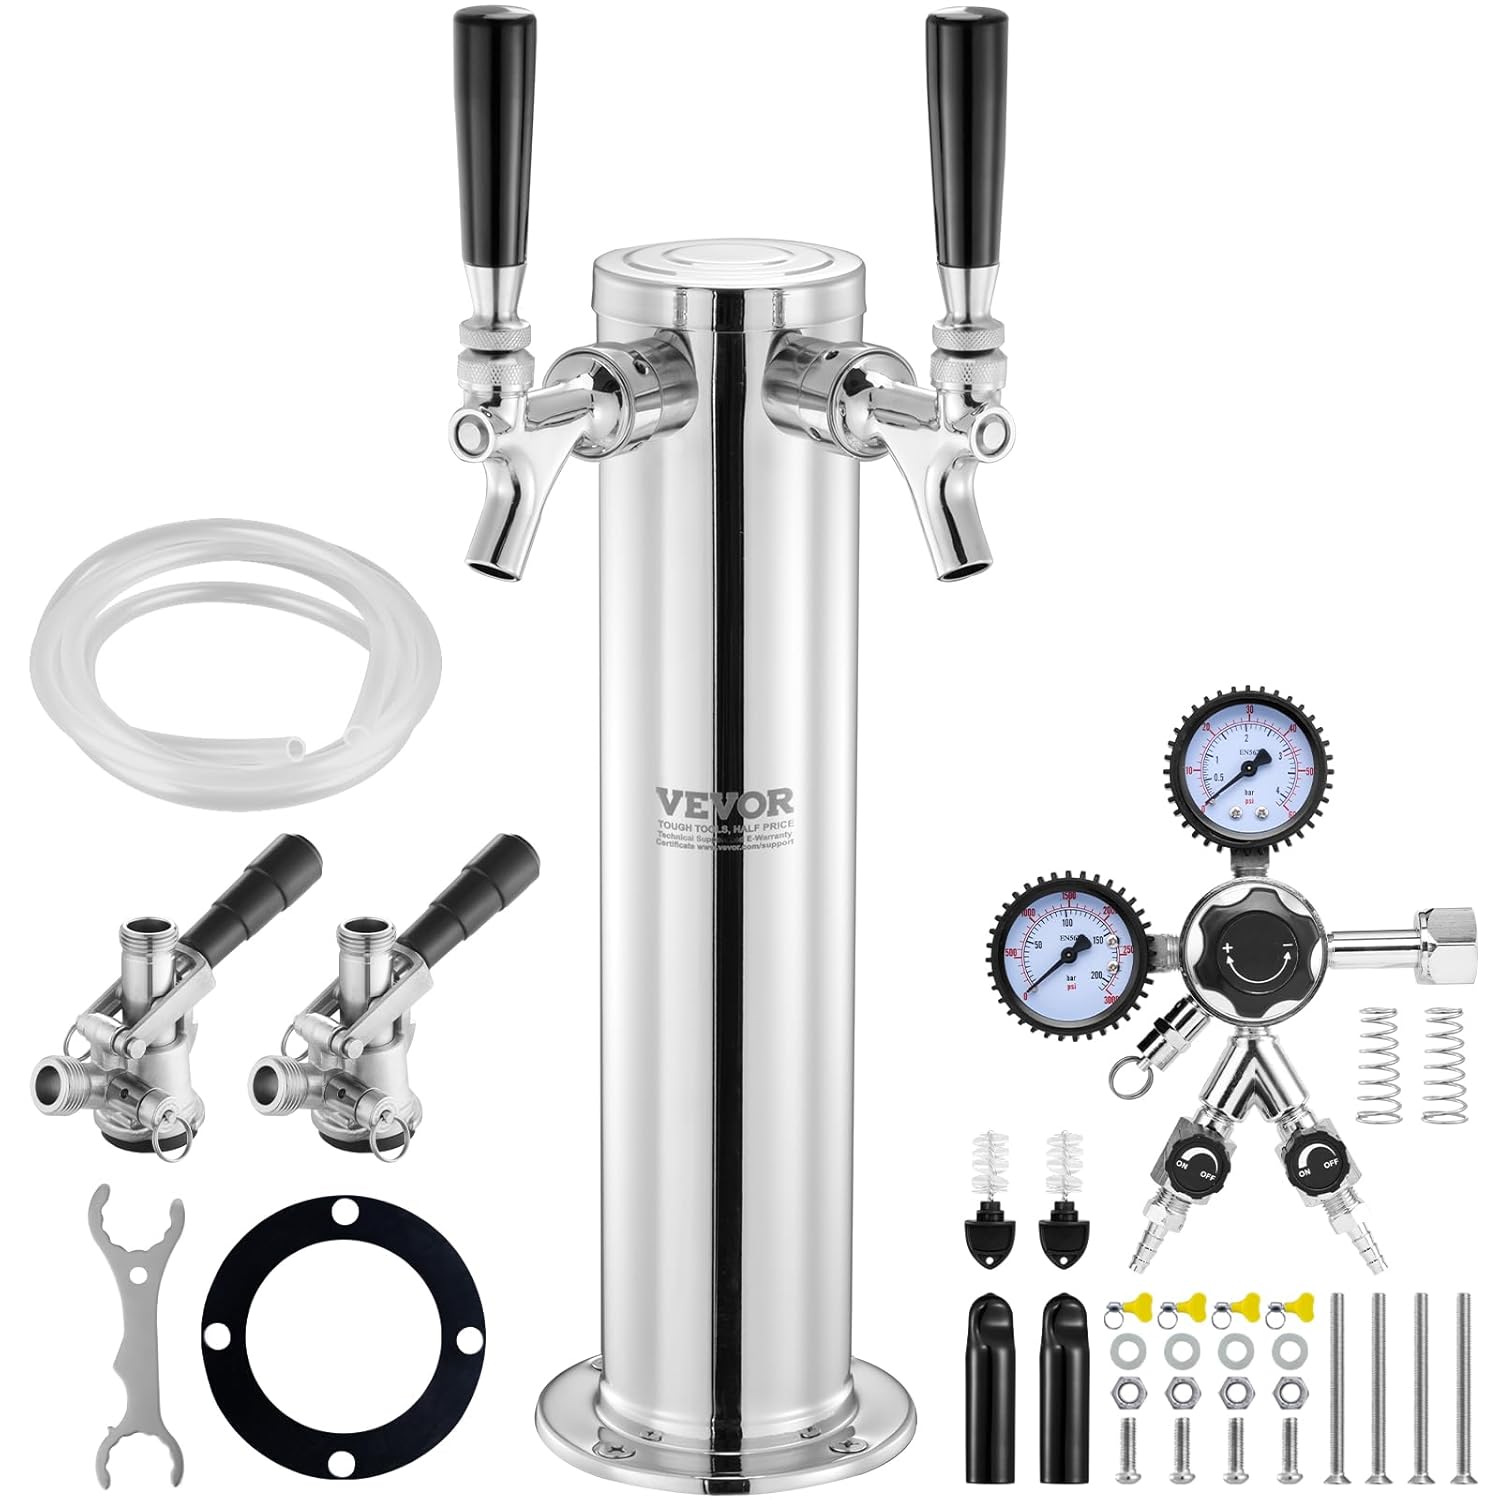 VEVOR Beer Dispenser Beer Tower Beer Conversion Kit with Two Taps, Beer Tower Dispenser Stainless Steel with Double Gauge W21.8 Regulator and S System Barrel Coupling for Parties, Home etc.